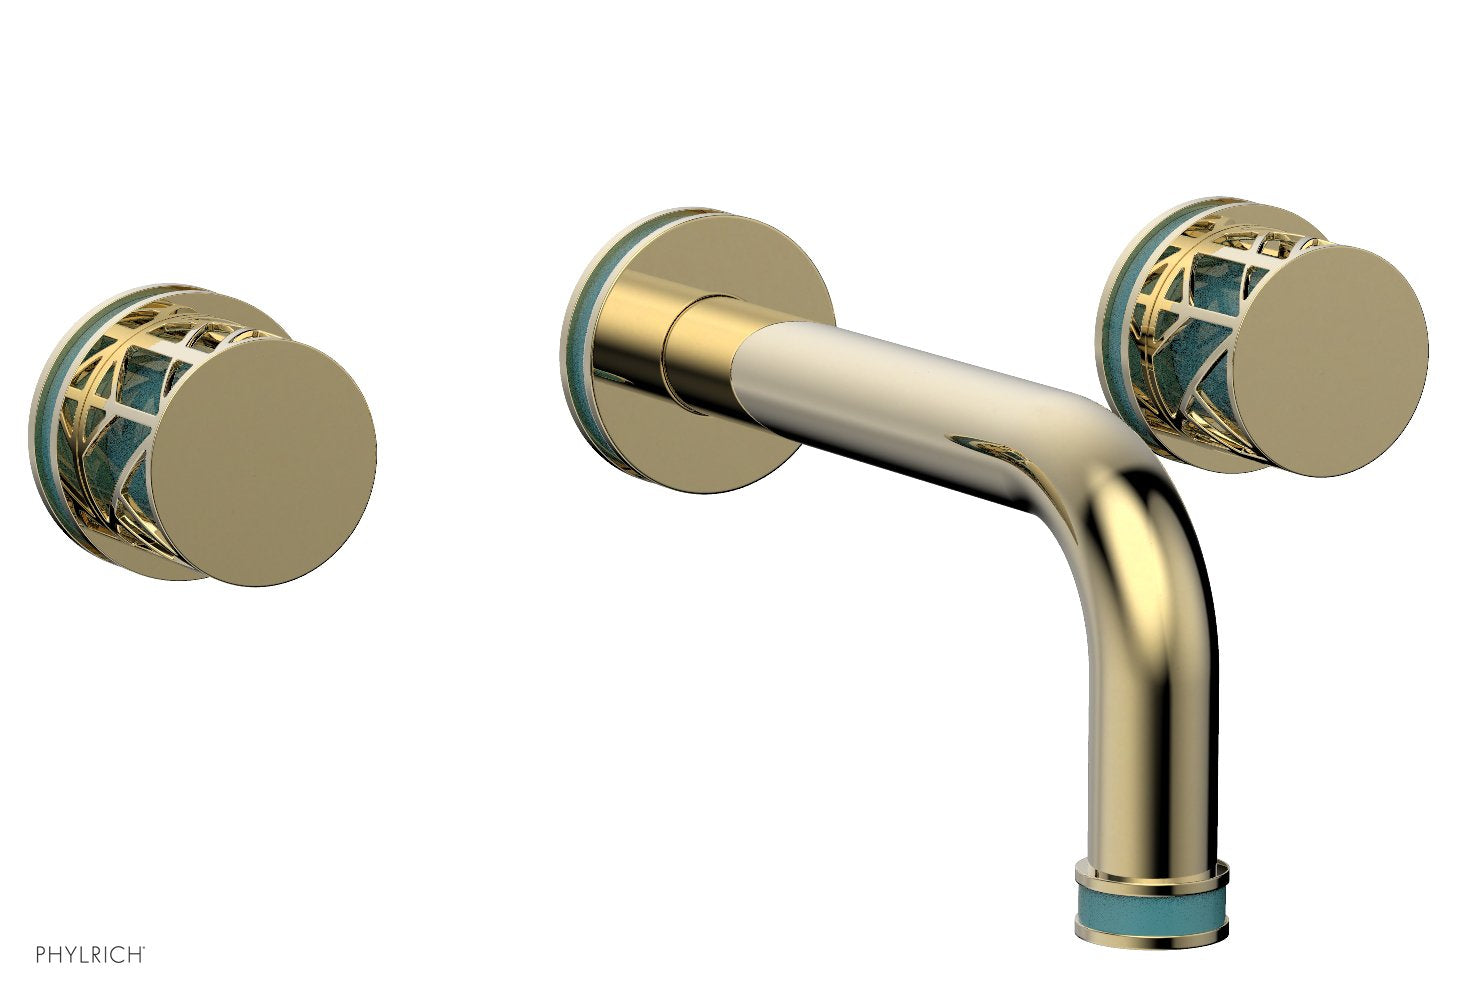 Phylrich JOLIE Wall Lavatory Set - Round Handles with "Turquoise" Accents